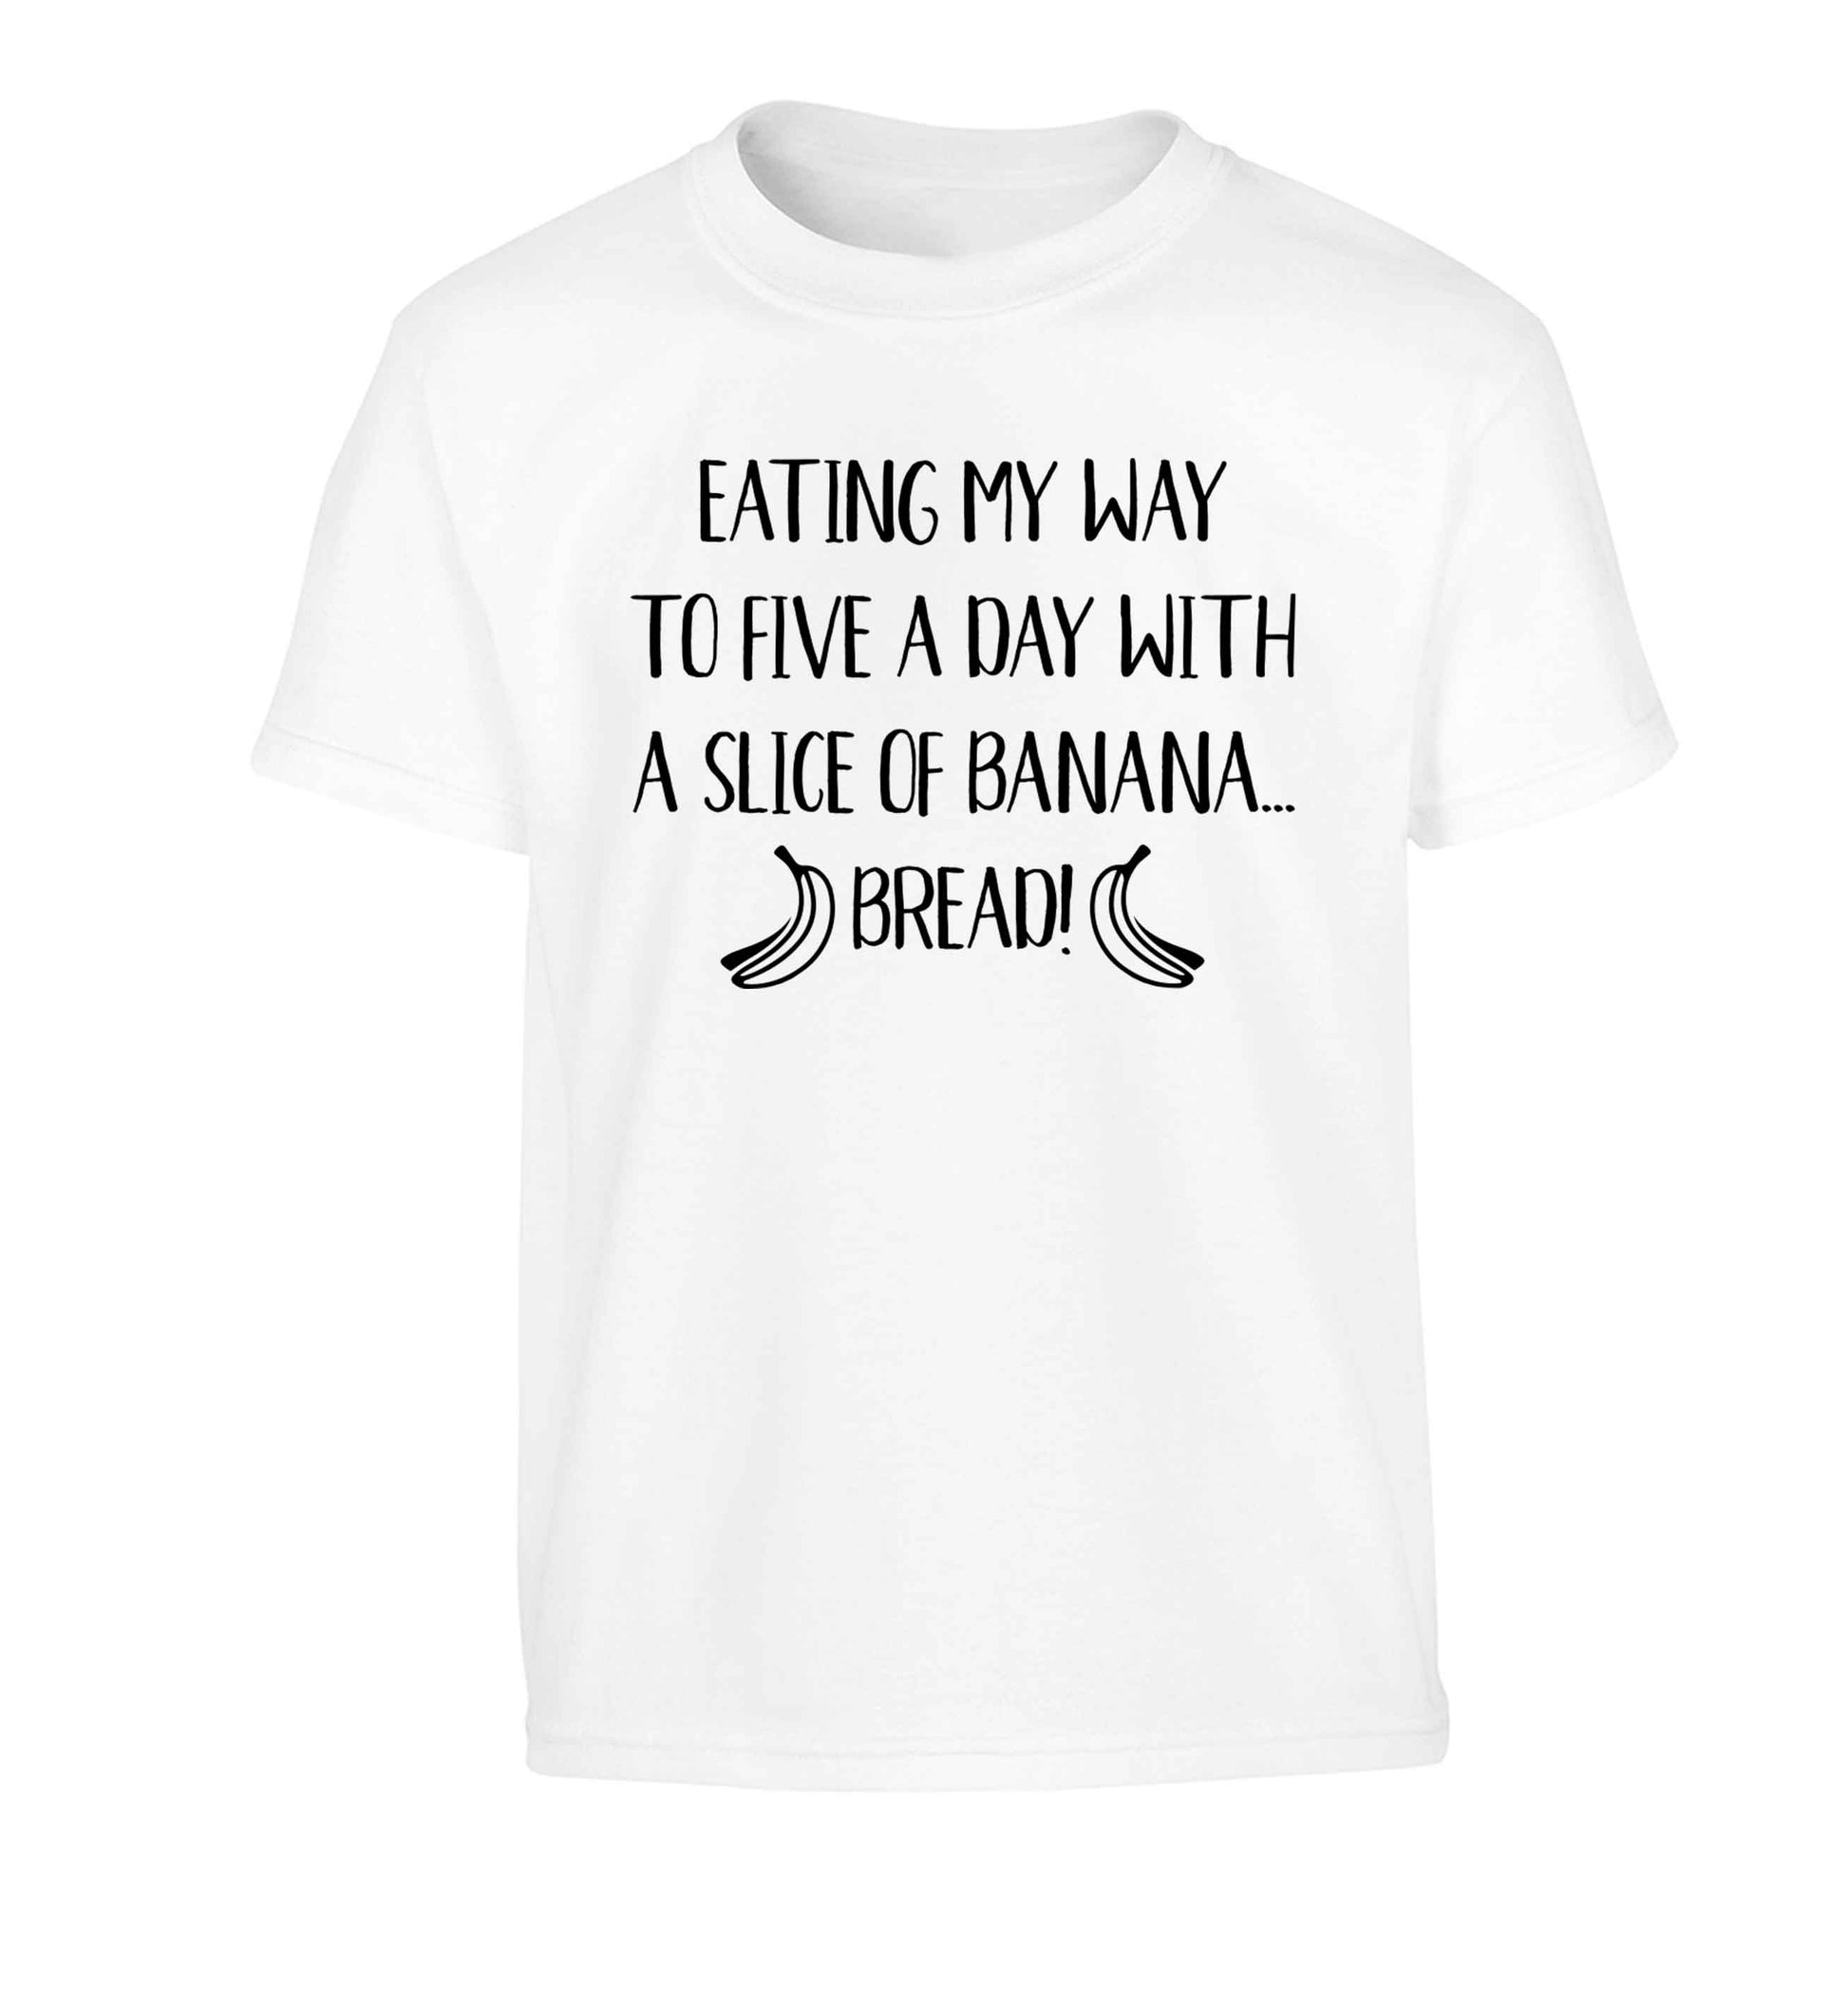 Eating my way to five a day with a slice of banana bread Children's white Tshirt 12-13 Years